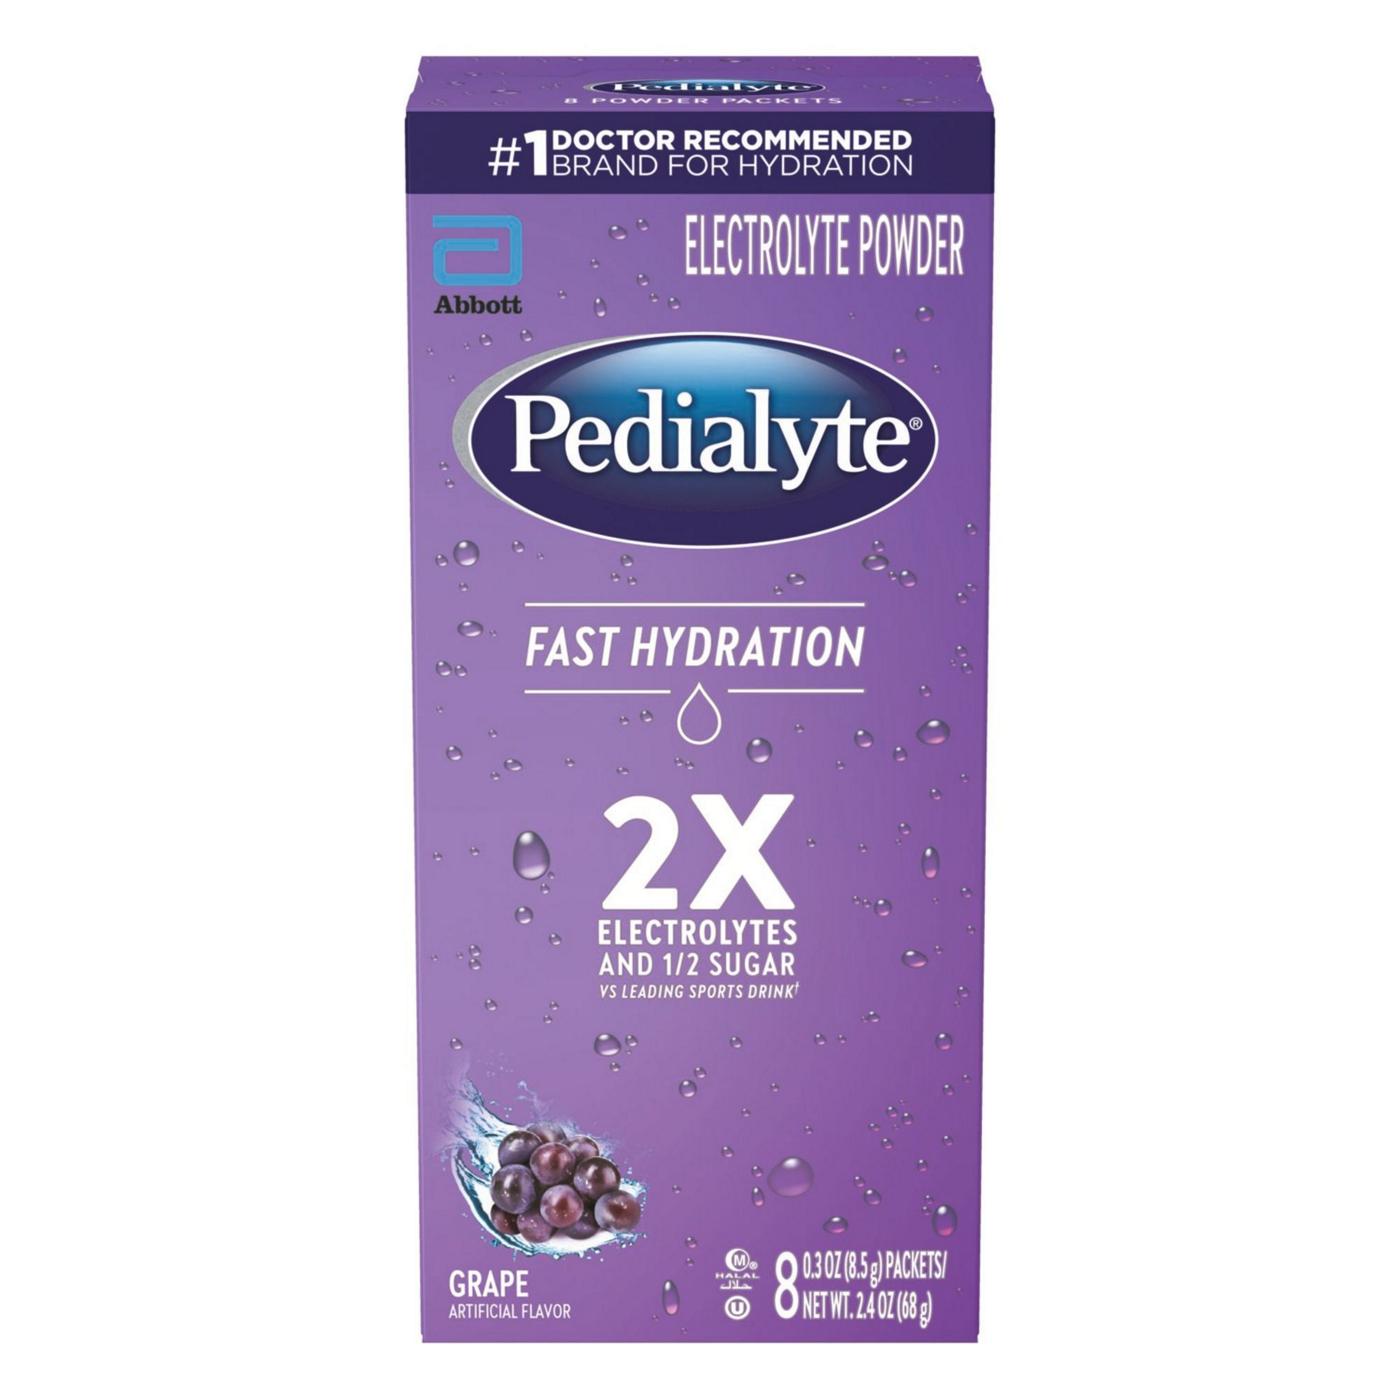 Pedialyte Fast Hydration Electrolyte Packets - Grape; image 1 of 8